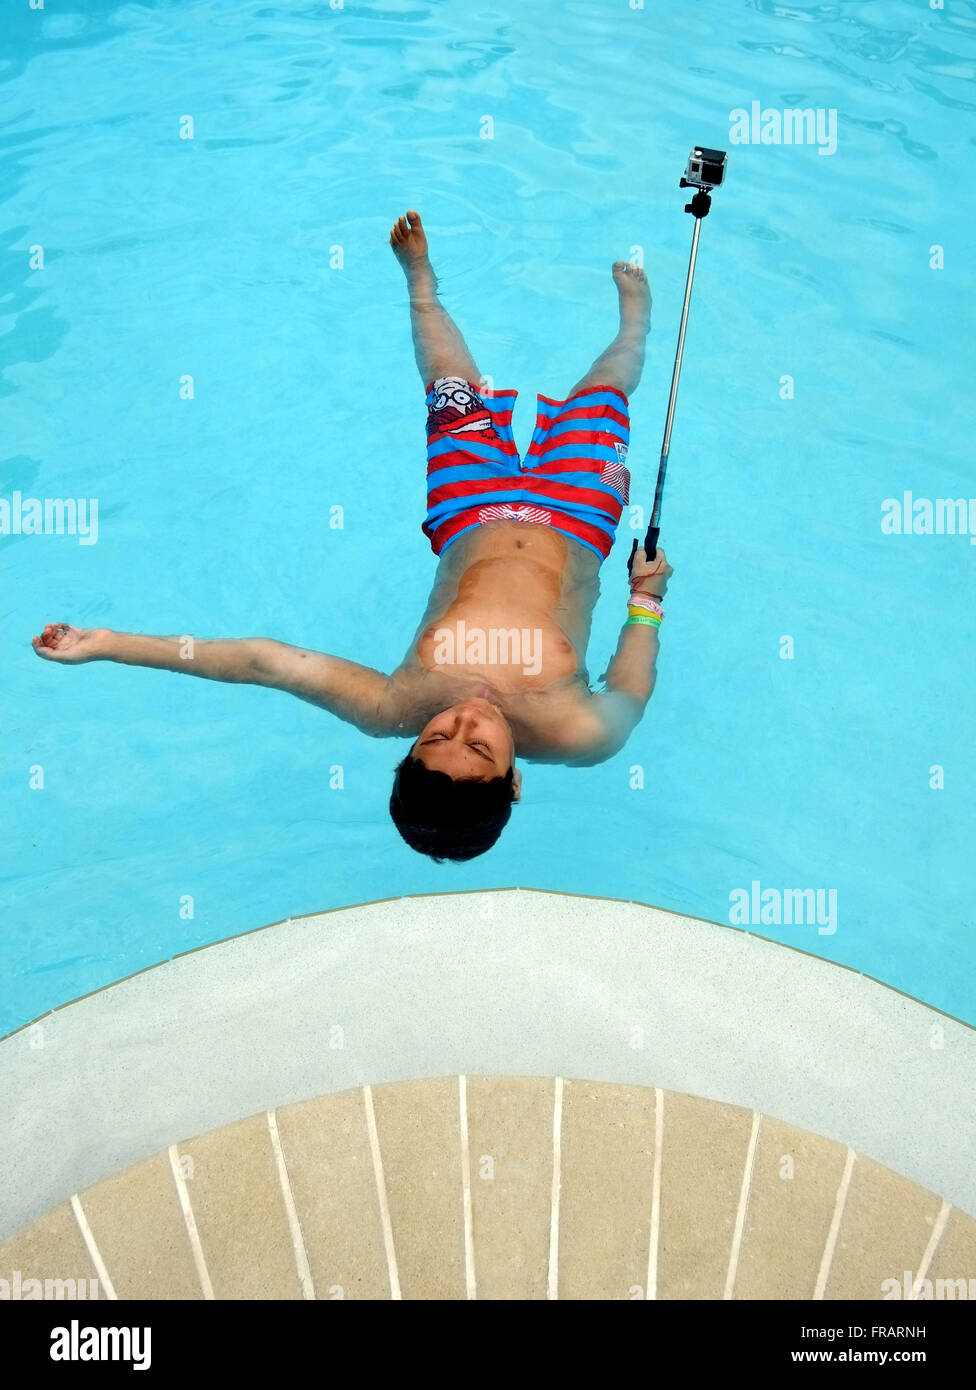 Colorful, graphic image of 12 year old boy lying on his back in a swimming pool, holding a go pro camera on a camera stick . Stock Photo